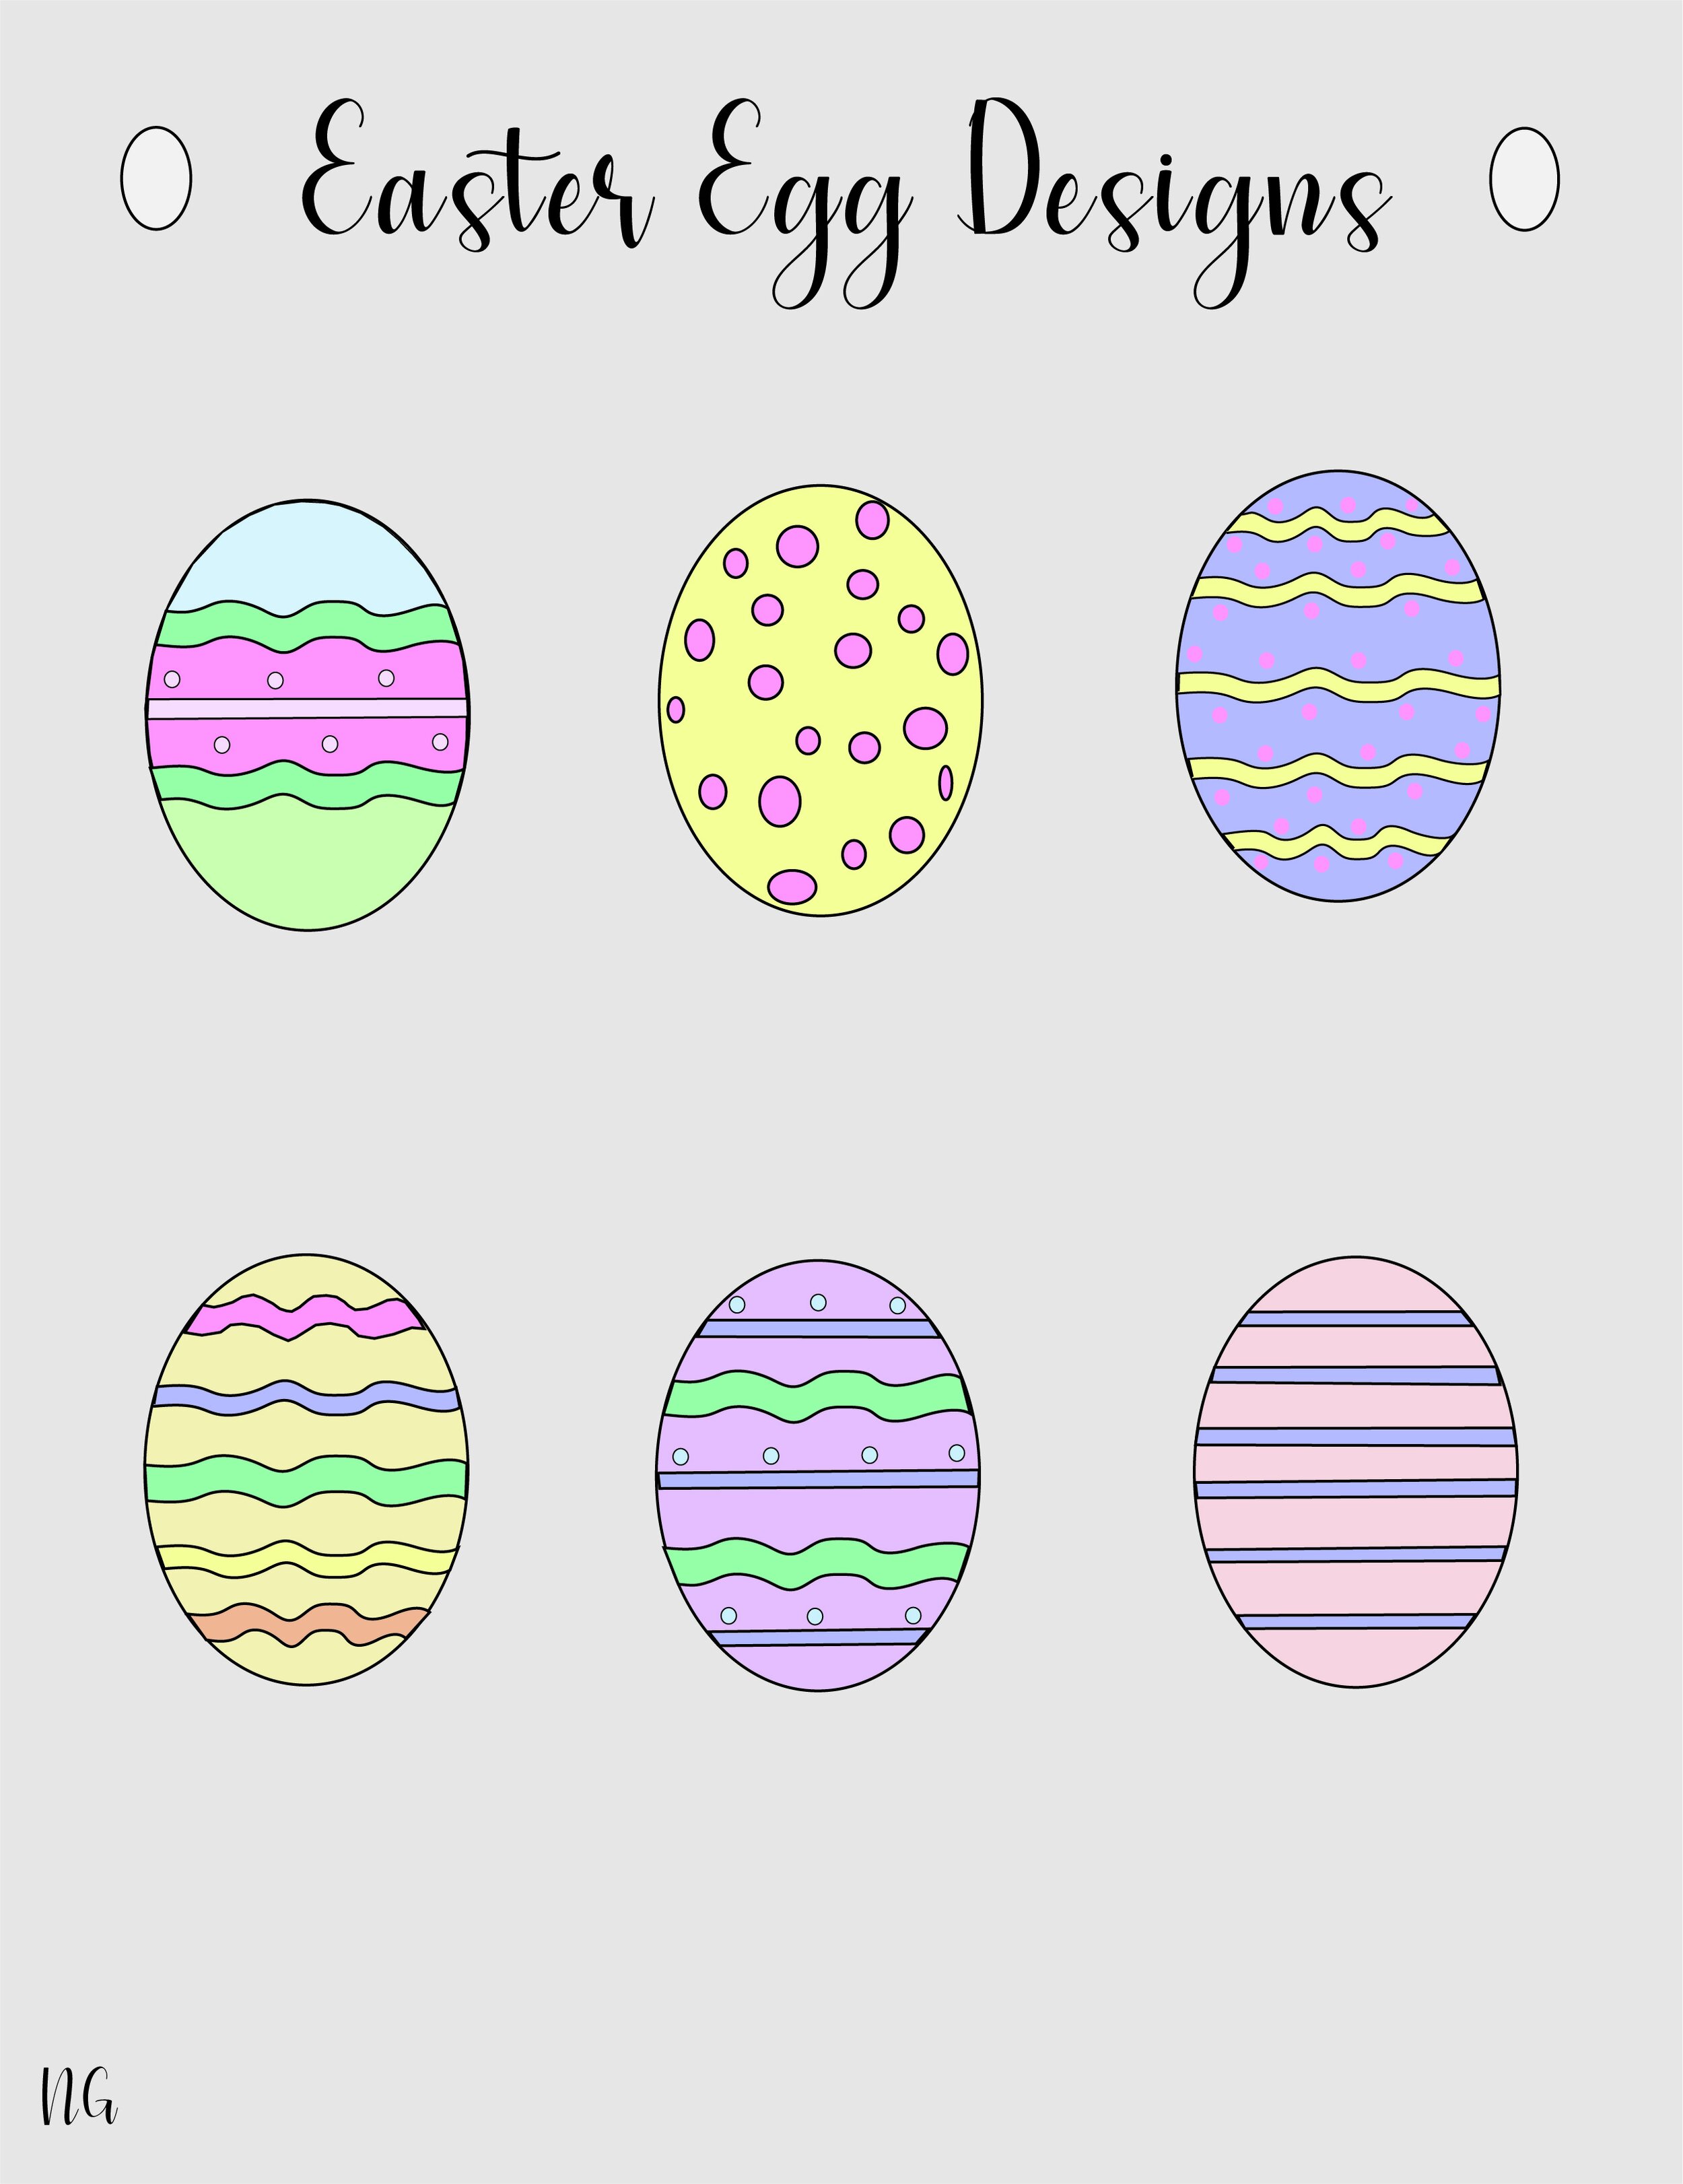 Try these design ideas on your Easter eggs this year!